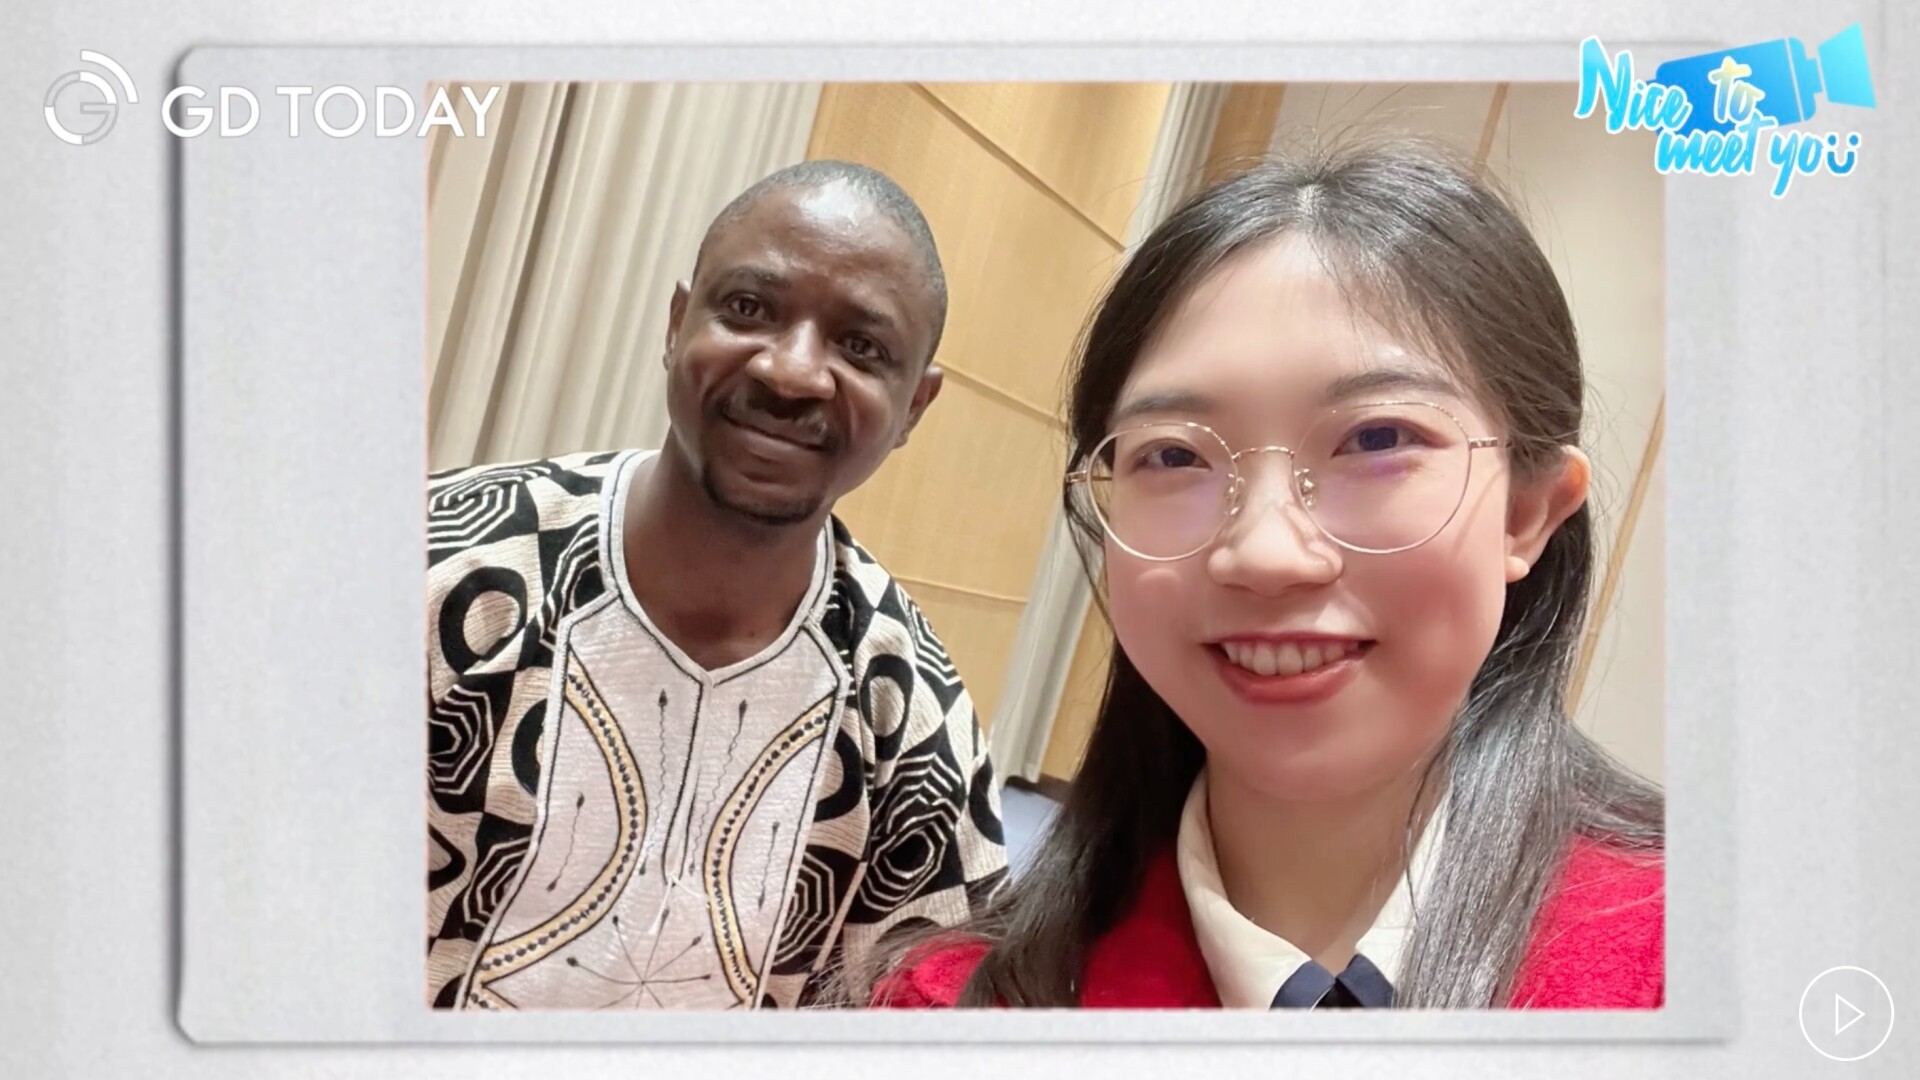 Nice to meet you丨Guangdong is where anyone can realize their dreams：Liberian Reporter